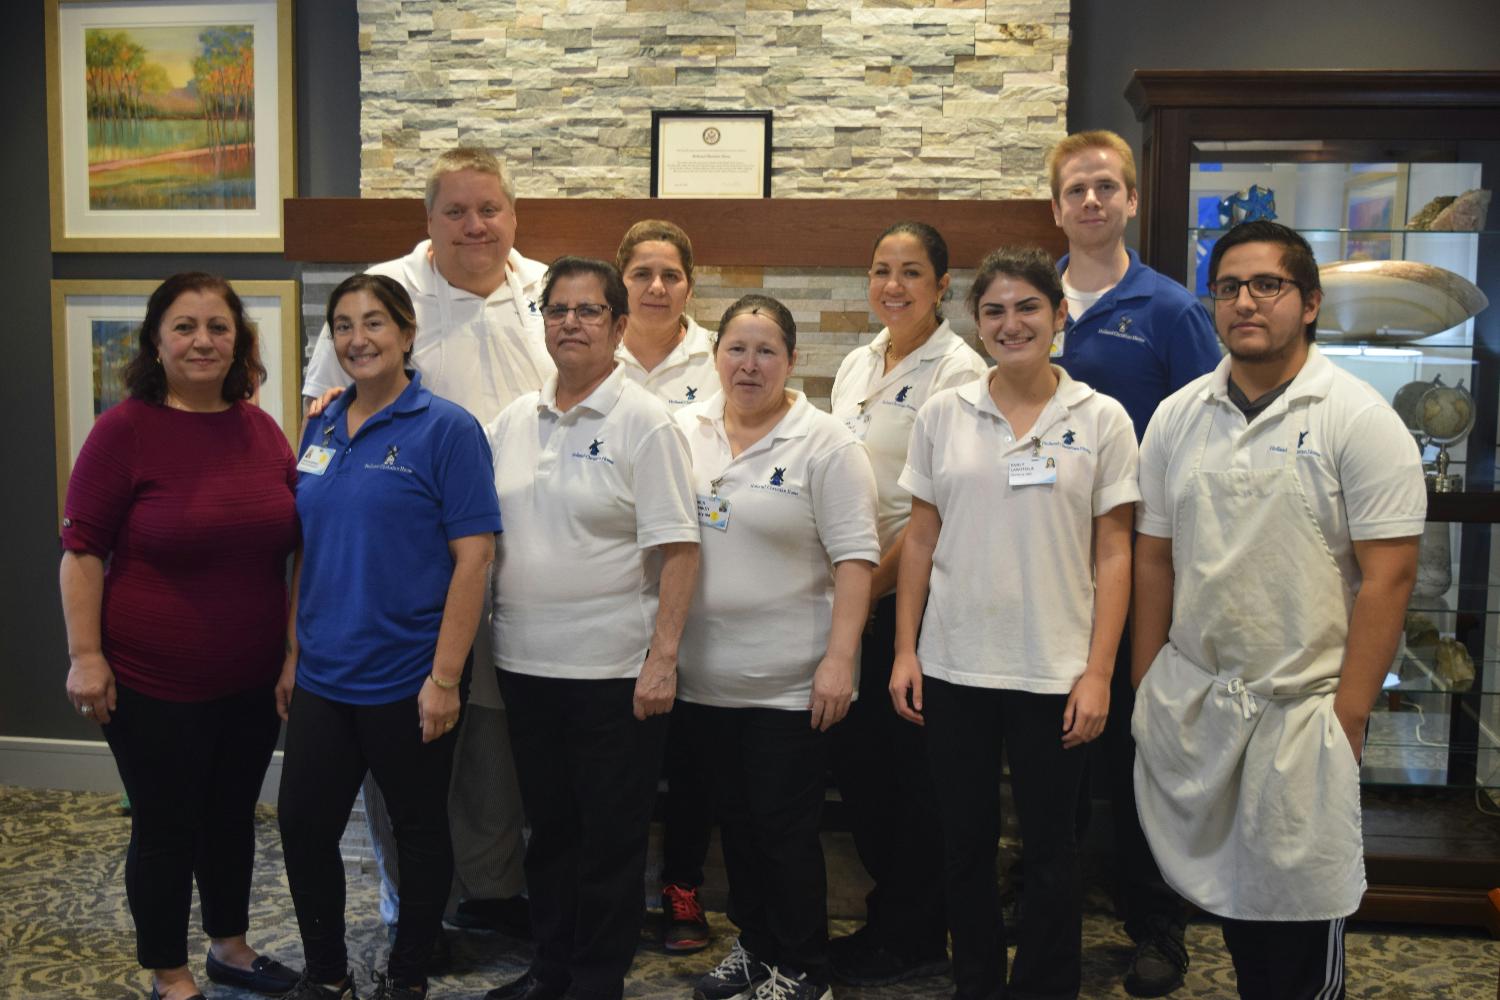 Our Food Services Team provides service like no other.